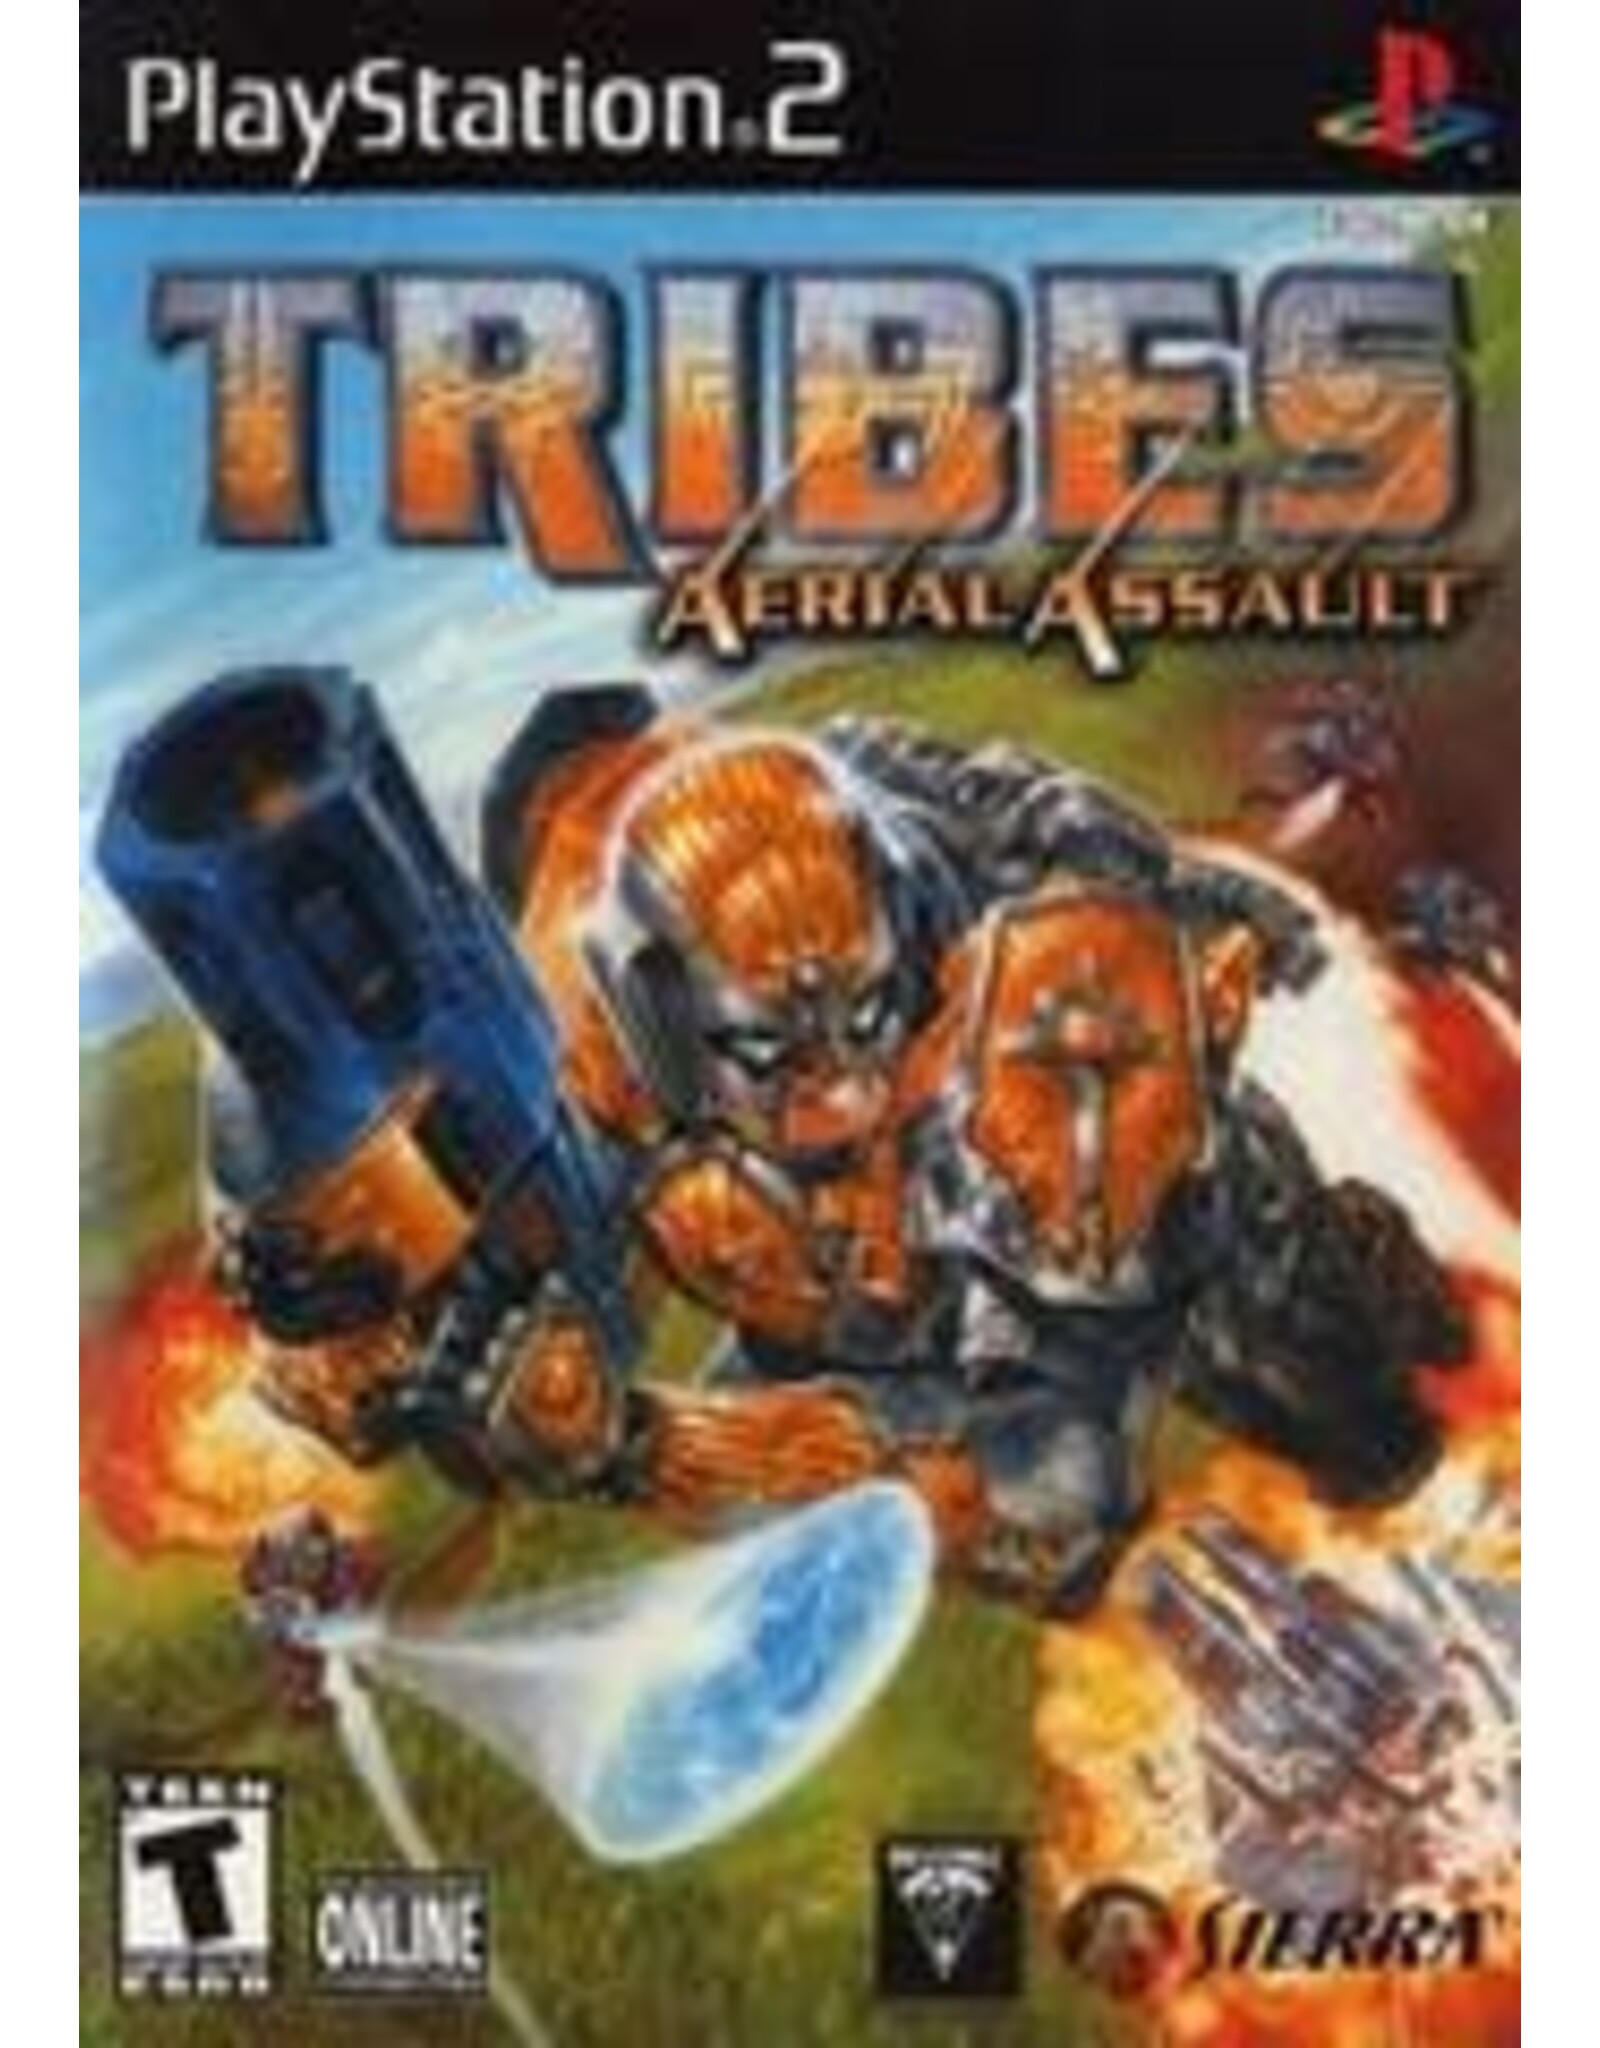 Playstation 2 TRIBES Aerial Assault (Used)